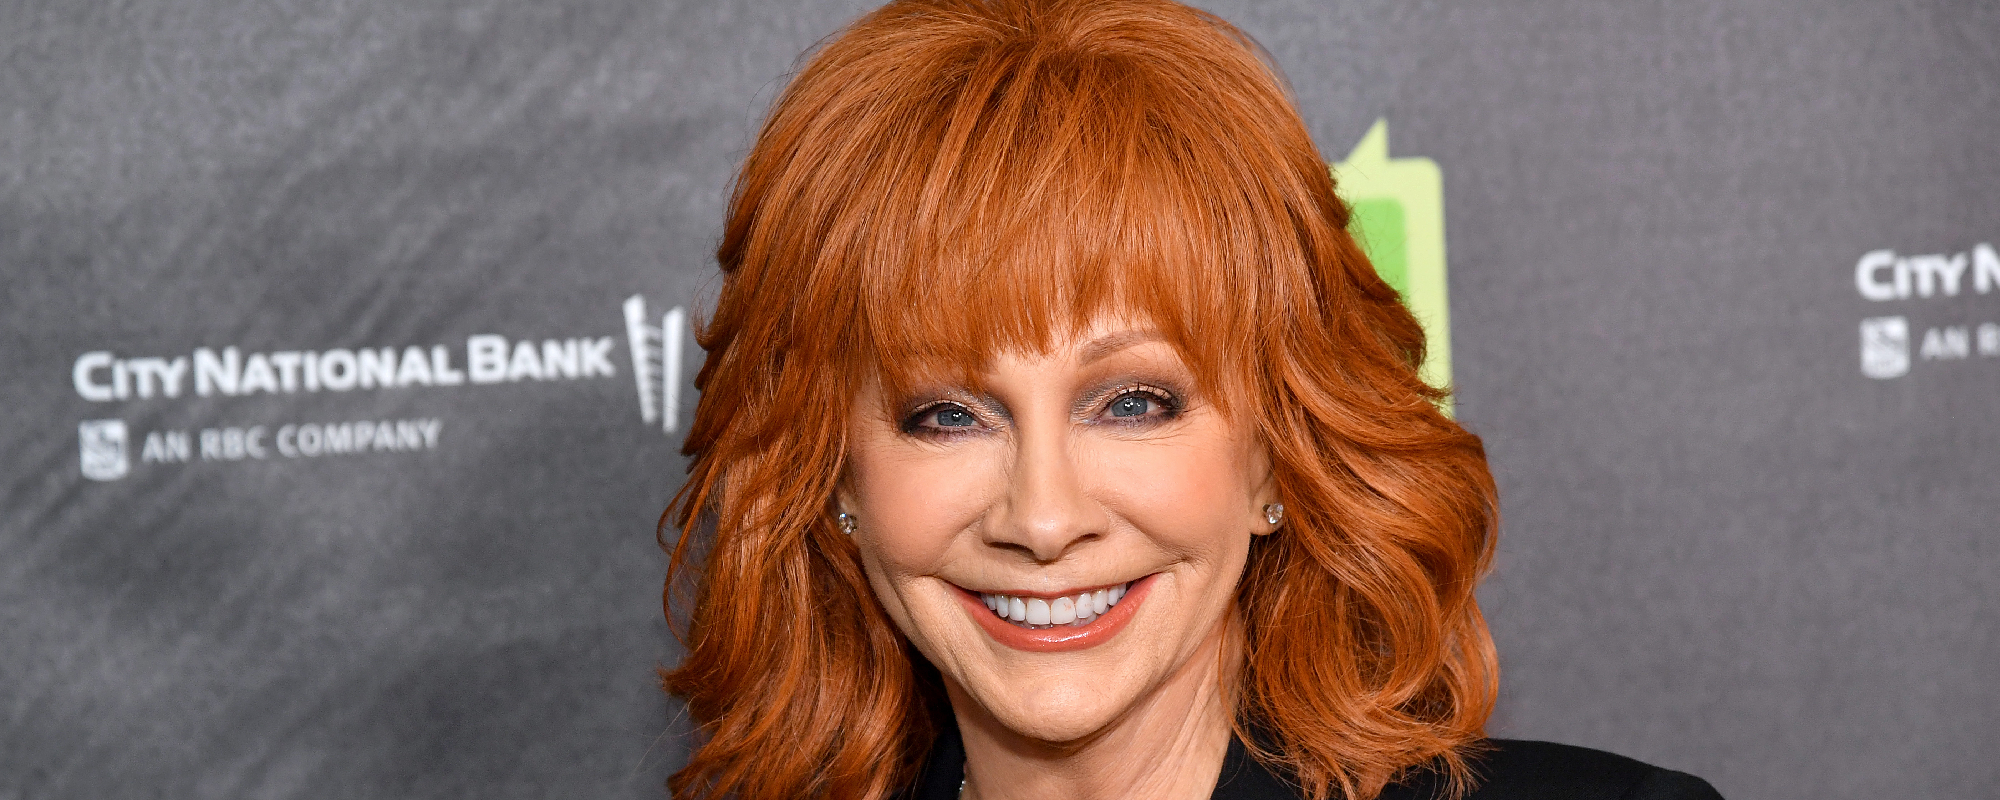 ‘The Voice’ Coach Reba McEntire Creates Hilarious New Dance With Chance The Rapper